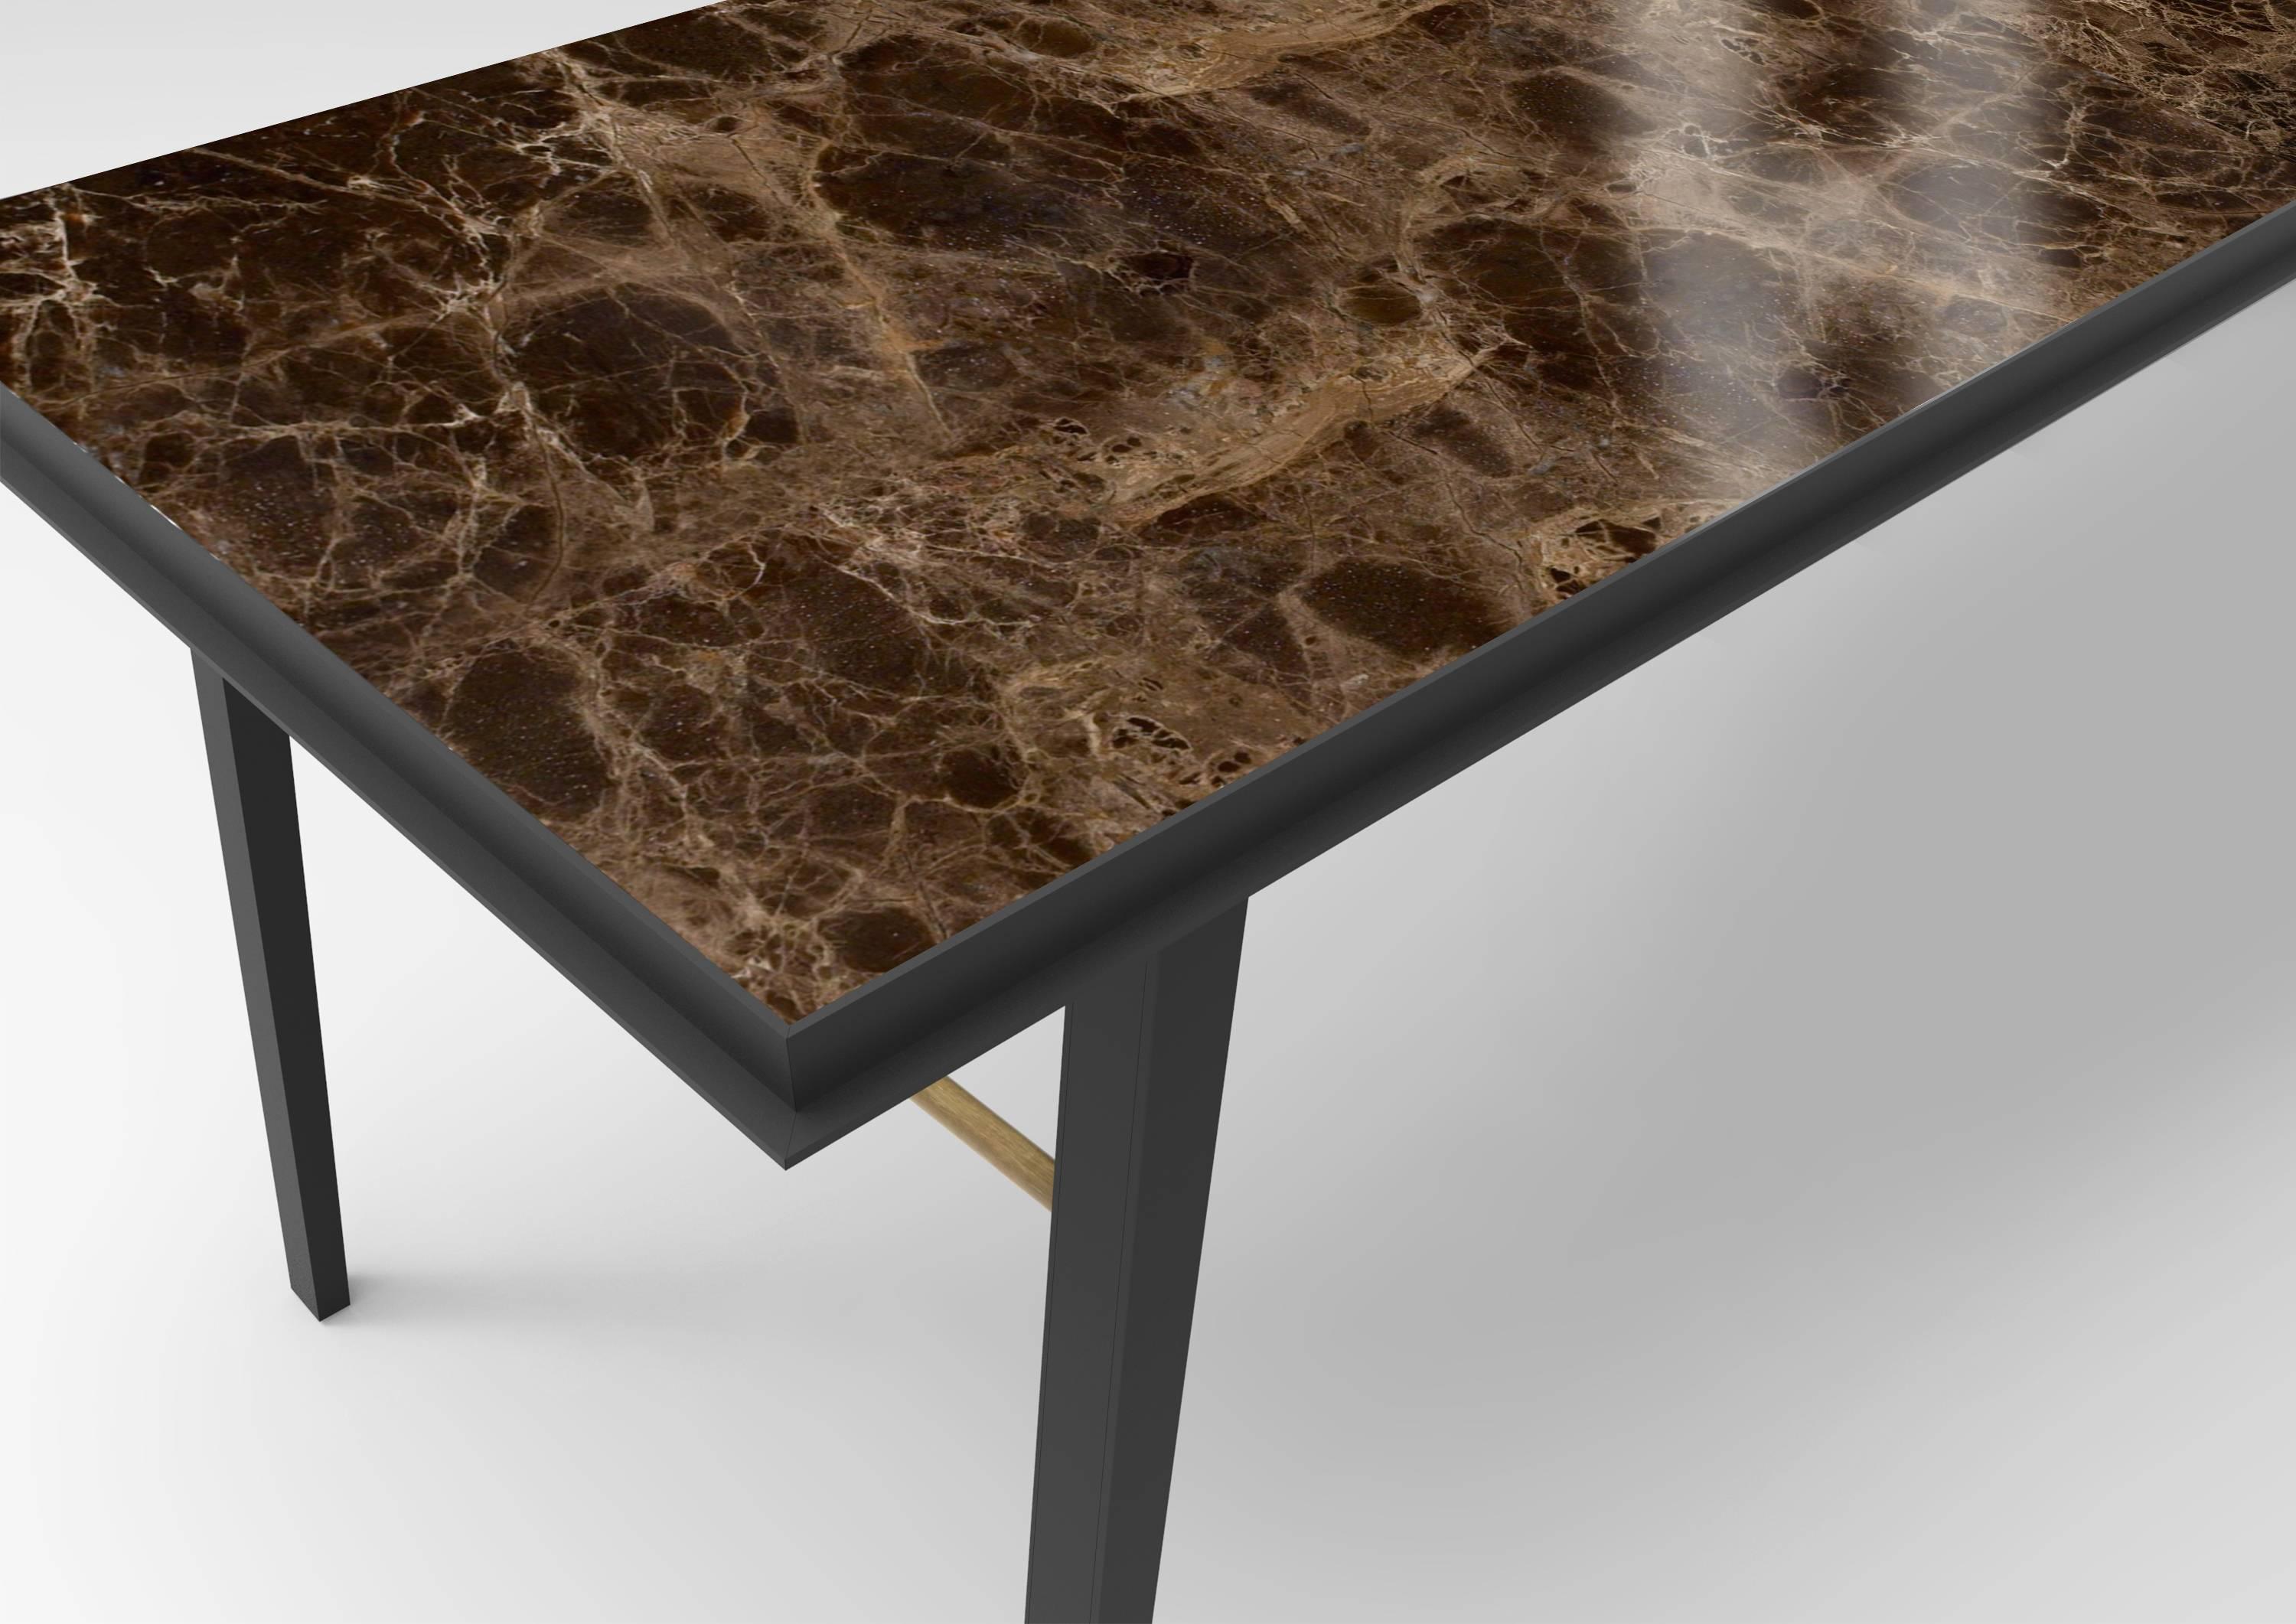 AES Emperador marble contemporary desk, Jan Garncarek
Materials: Emperador marble, brass, steel.
Dimensions: 73 x 180 x 78 cm
Weight: 110 kg

This unique desk consists of a metal collar with Emperador marble top.
The frame is made from black